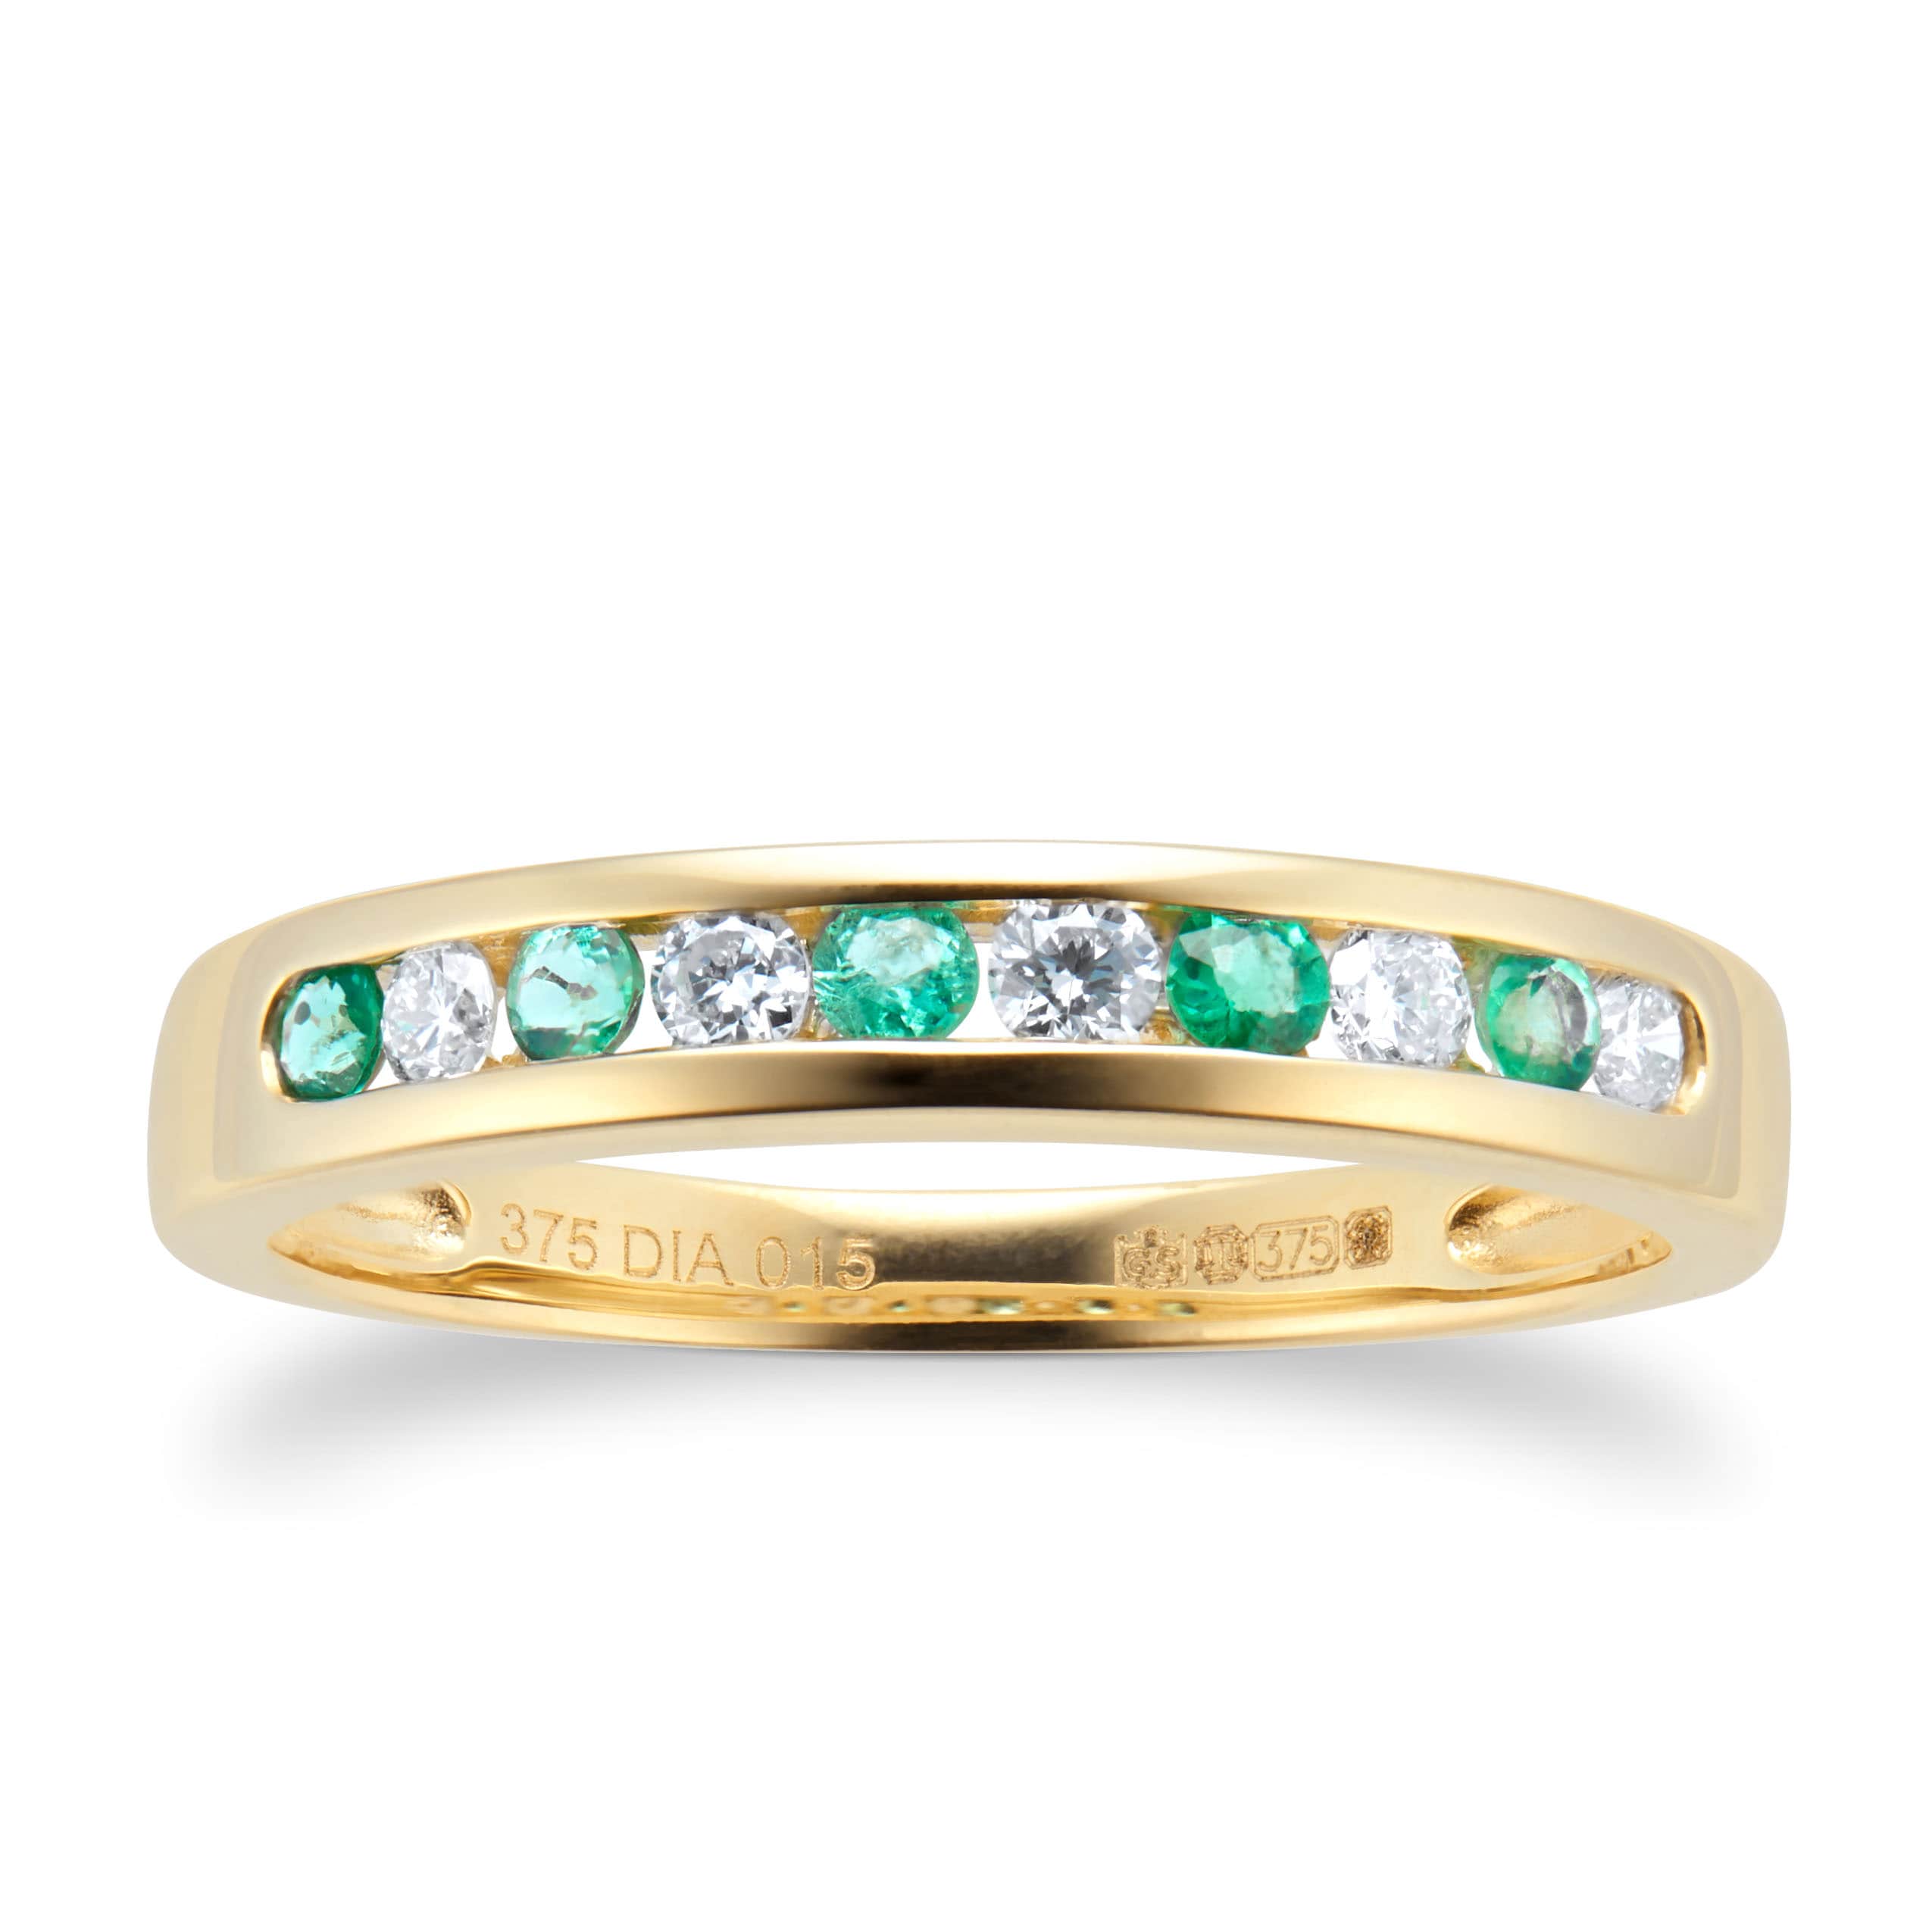 Brilliant Cut Emerald And Diamond Eternity Ring In 9 Carat Yellow Gold - Ring Size J